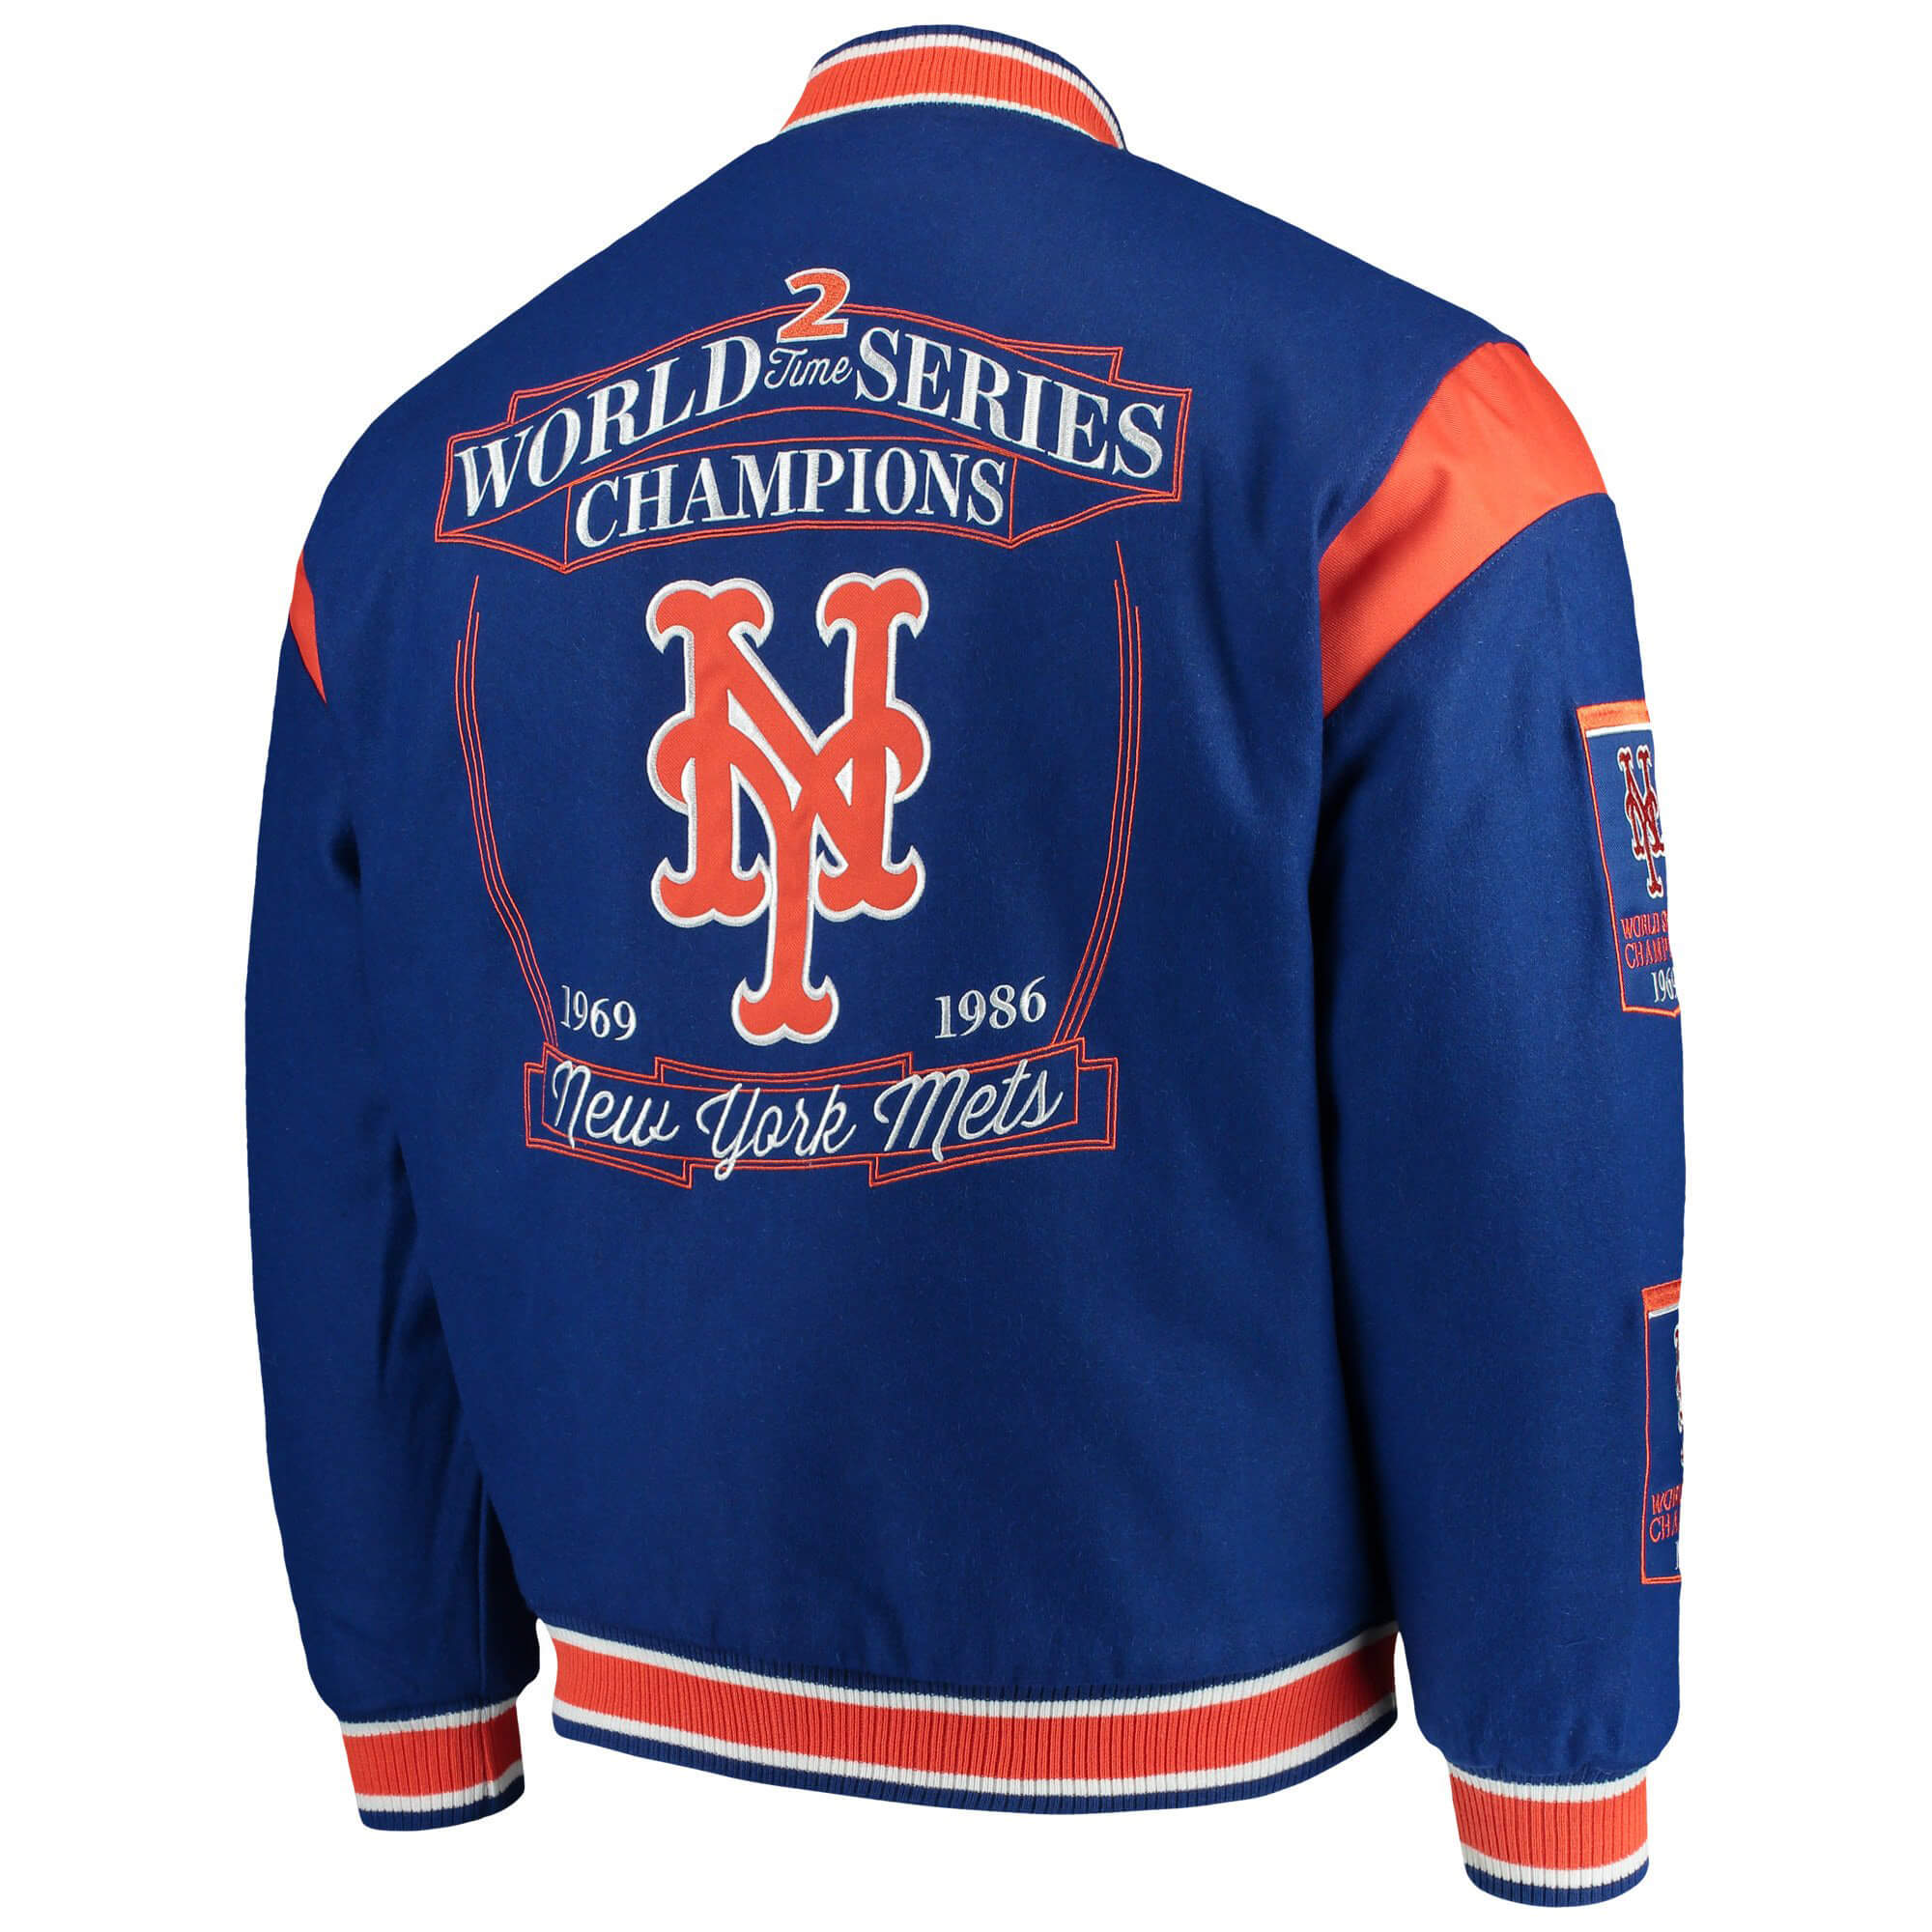 New York Mets 2 time World Series Champions Jacket - Maker of Jacket